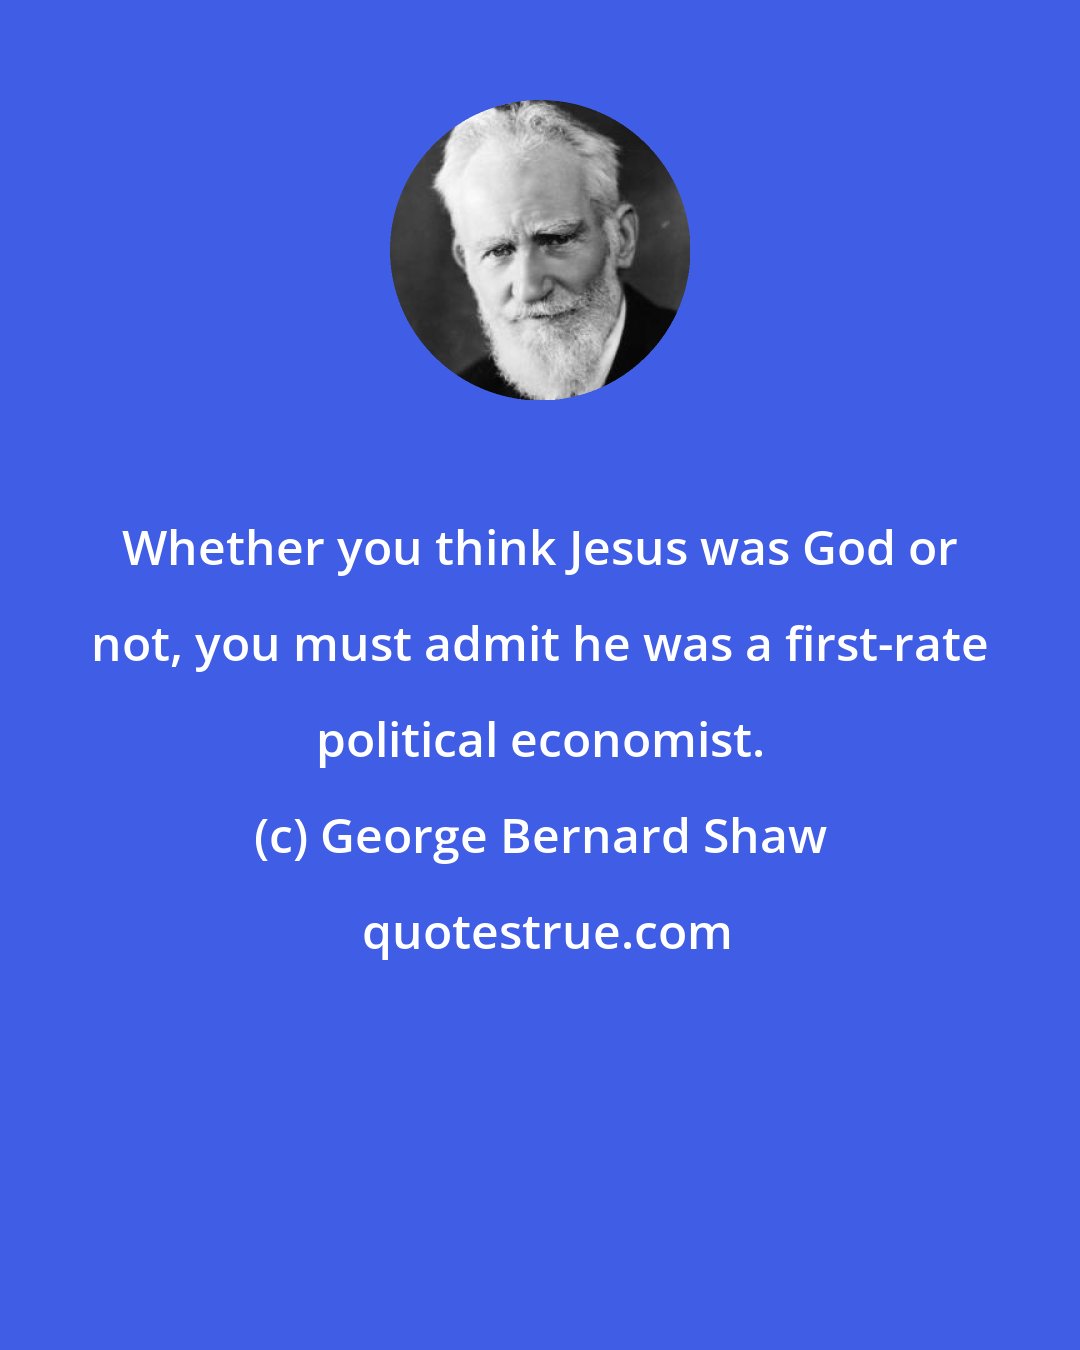 George Bernard Shaw: Whether you think Jesus was God or not, you must admit he was a first-rate political economist.